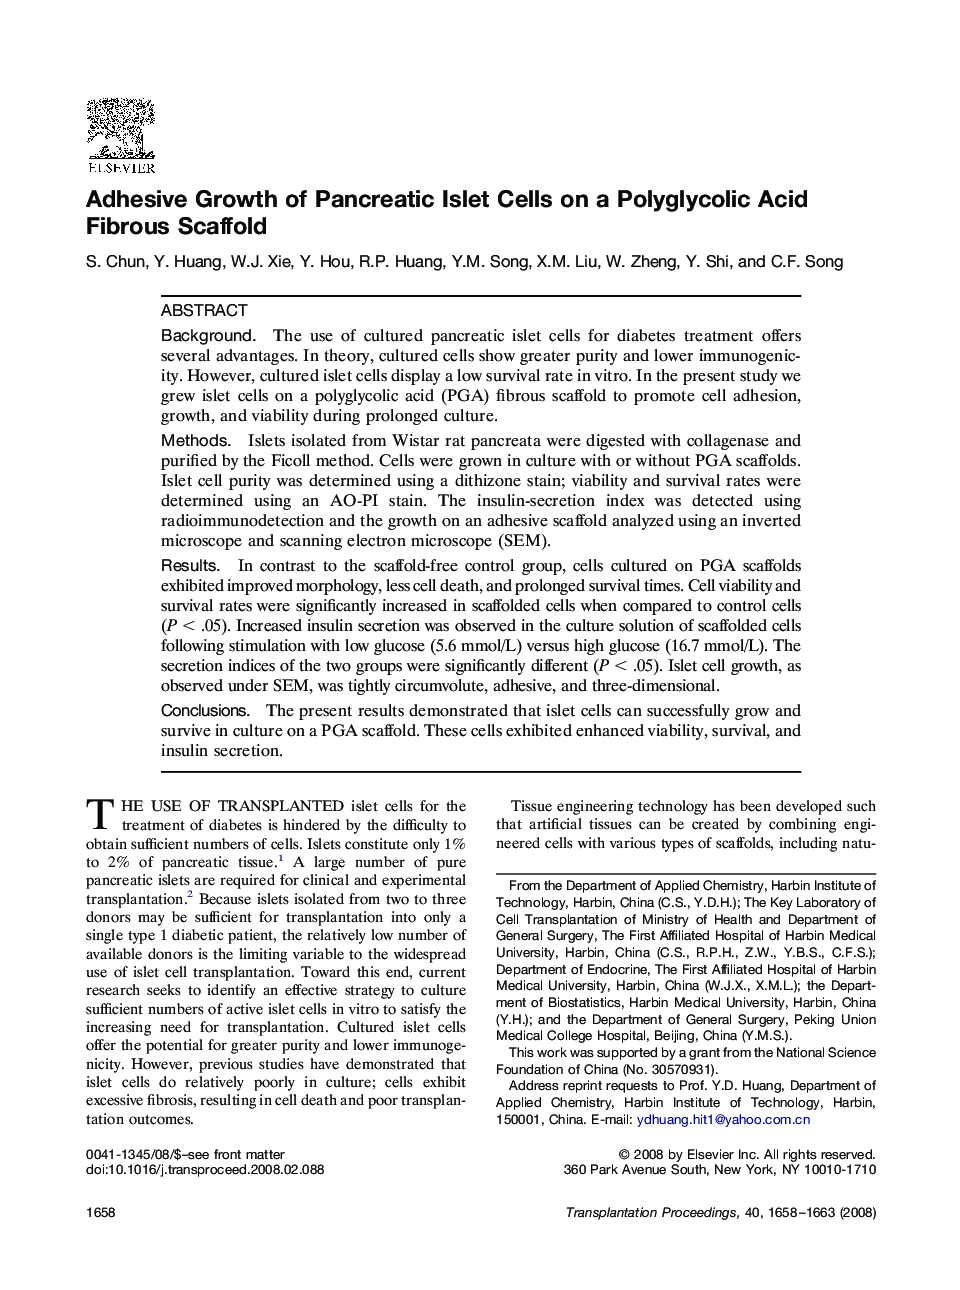 Adhesive Growth of Pancreatic Islet Cells on a Polyglycolic Acid Fibrous Scaffold 